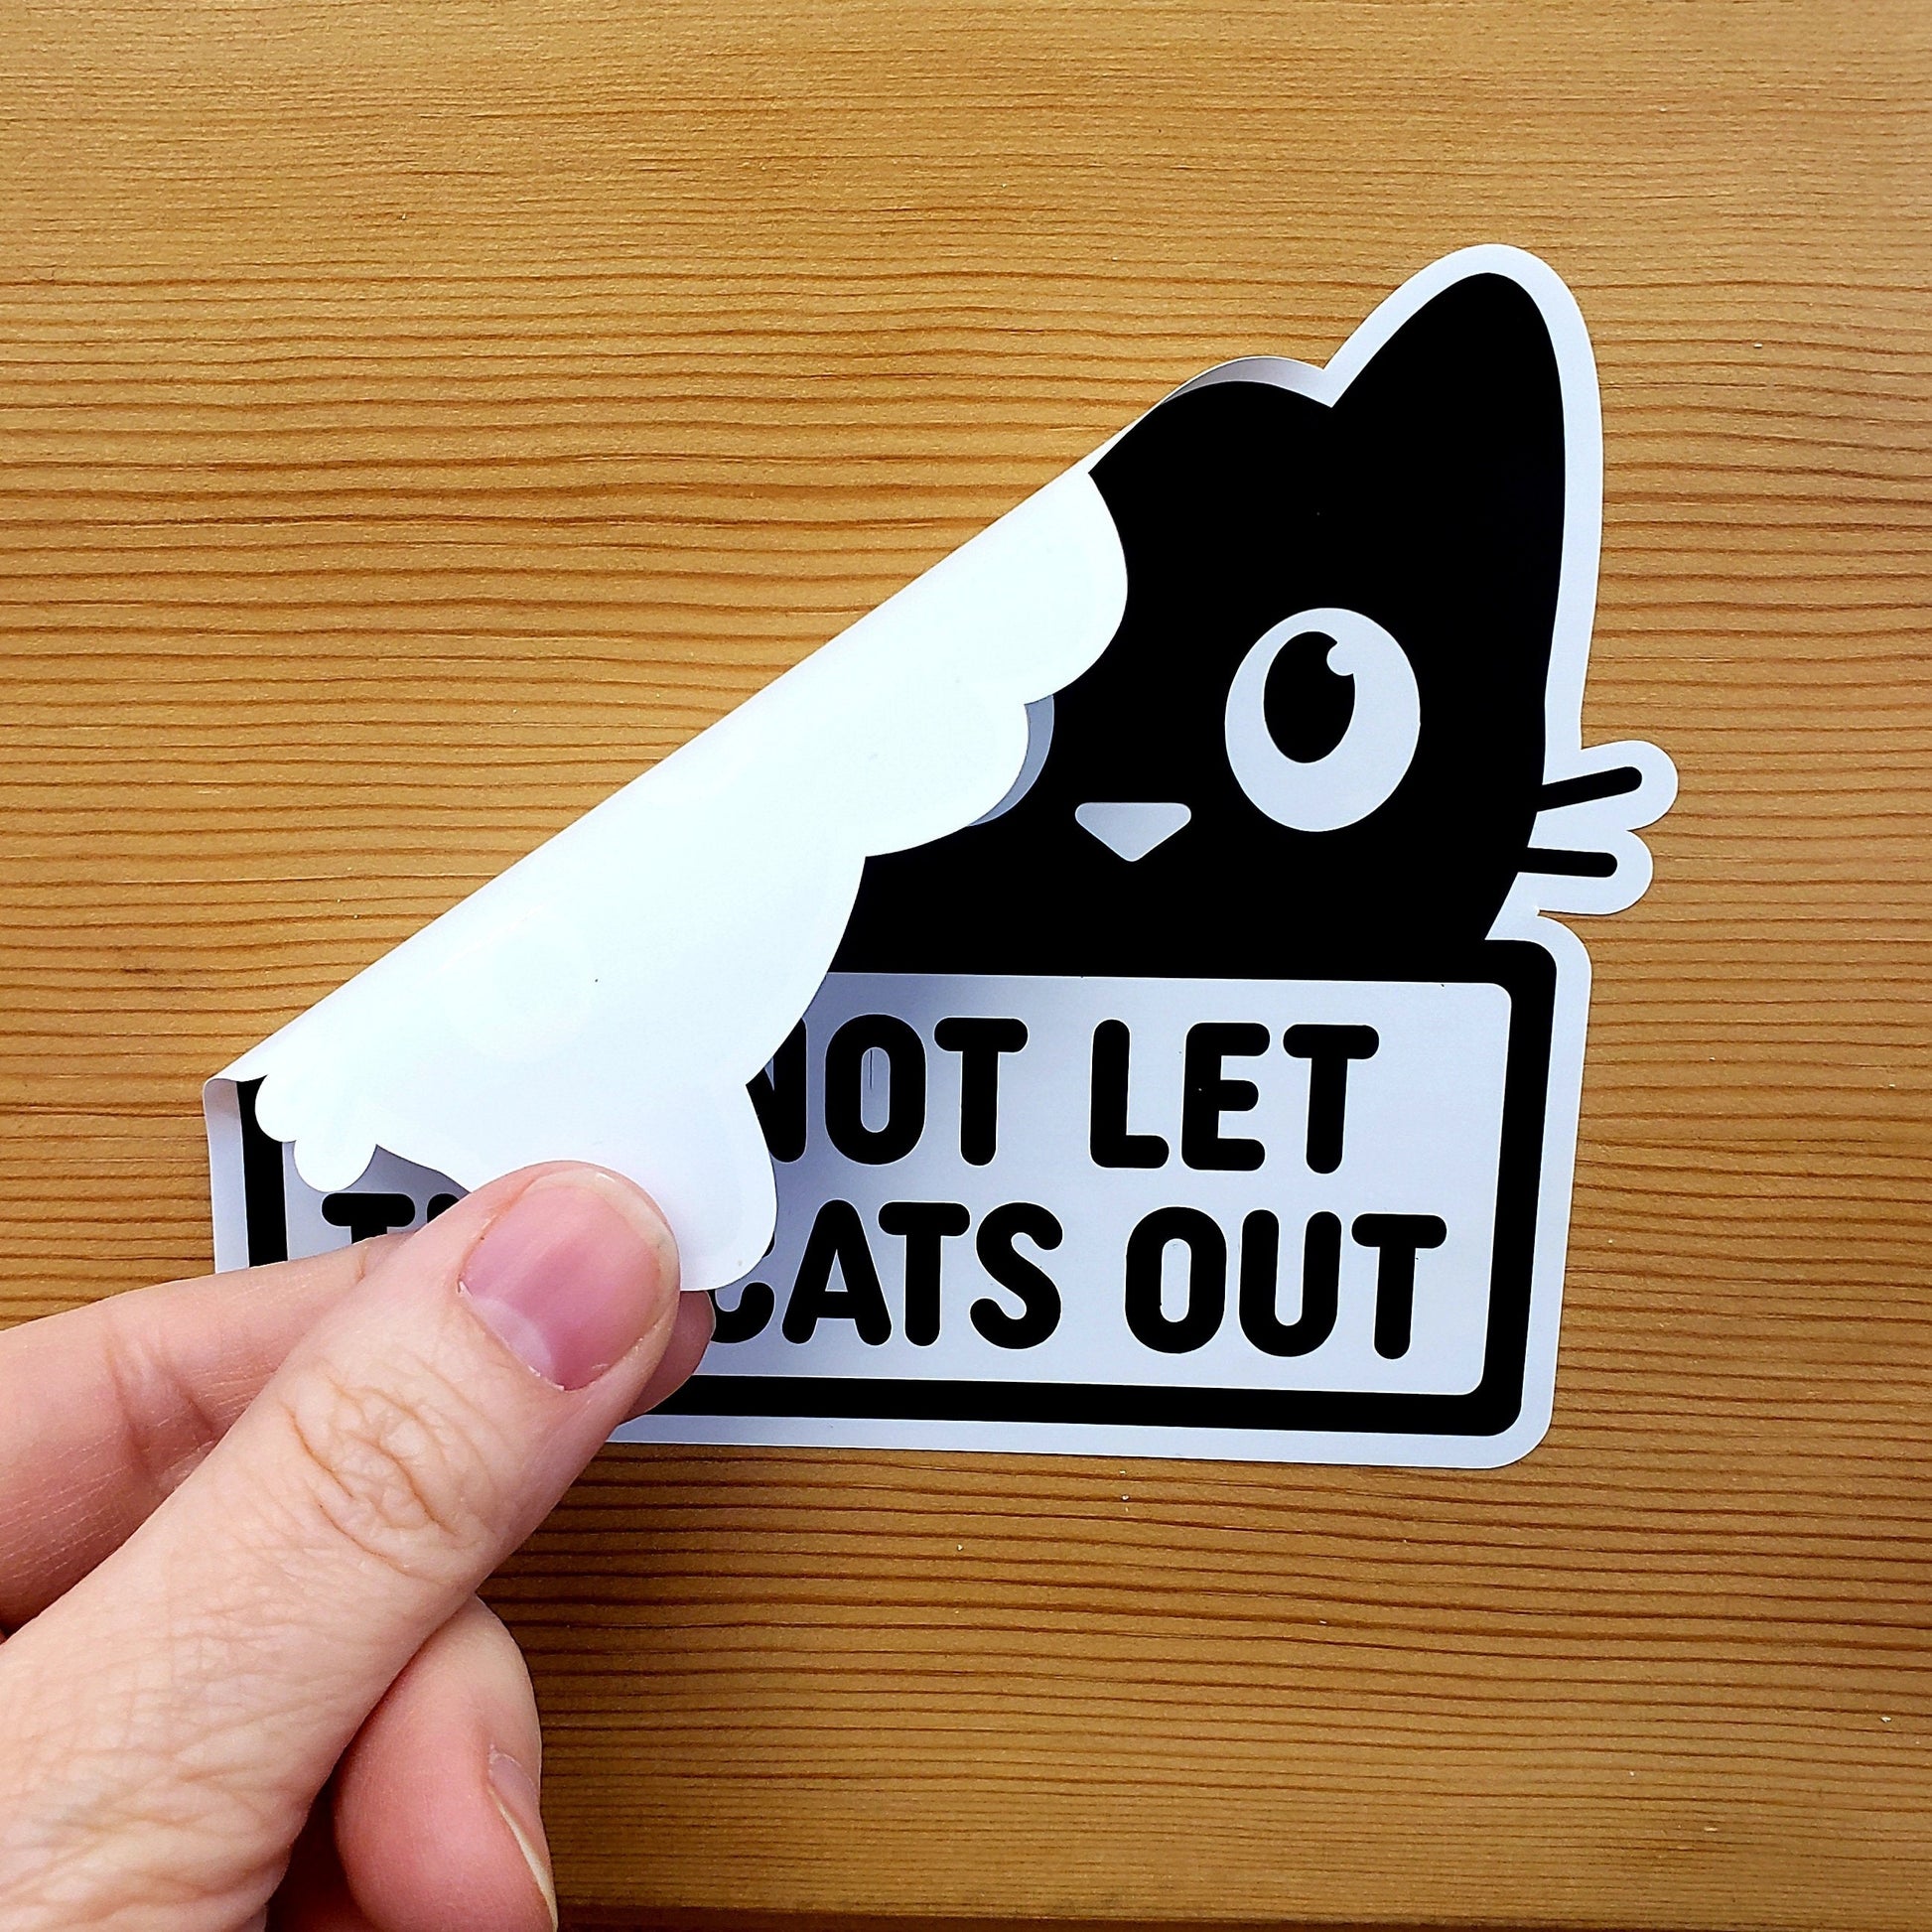 Do Not Let the Cats Out Sticker, black and white vinyl decal sticker, safe pet sign, gift for cat lover, indoor cats household, waterproof.